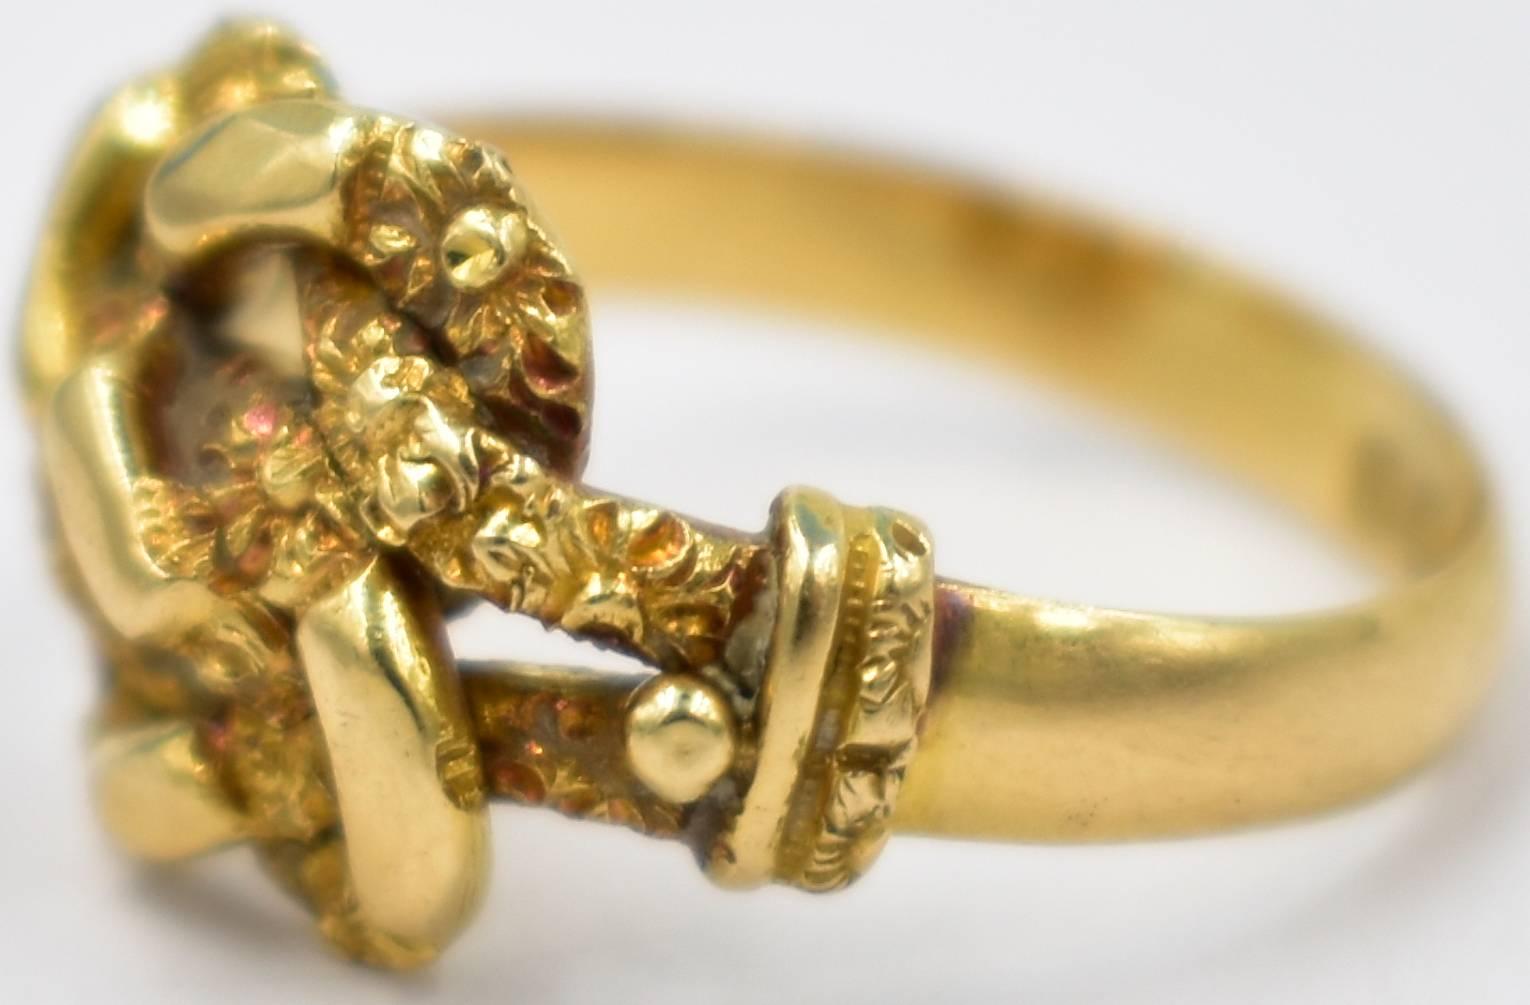 Edwardian 18K gold knot ring hallmarked Birmingham, 1904. This unusual knot ring, which measures a size 6 1/2, is carved with a floral motif. A rare and beautiful ring to wear day or night. 